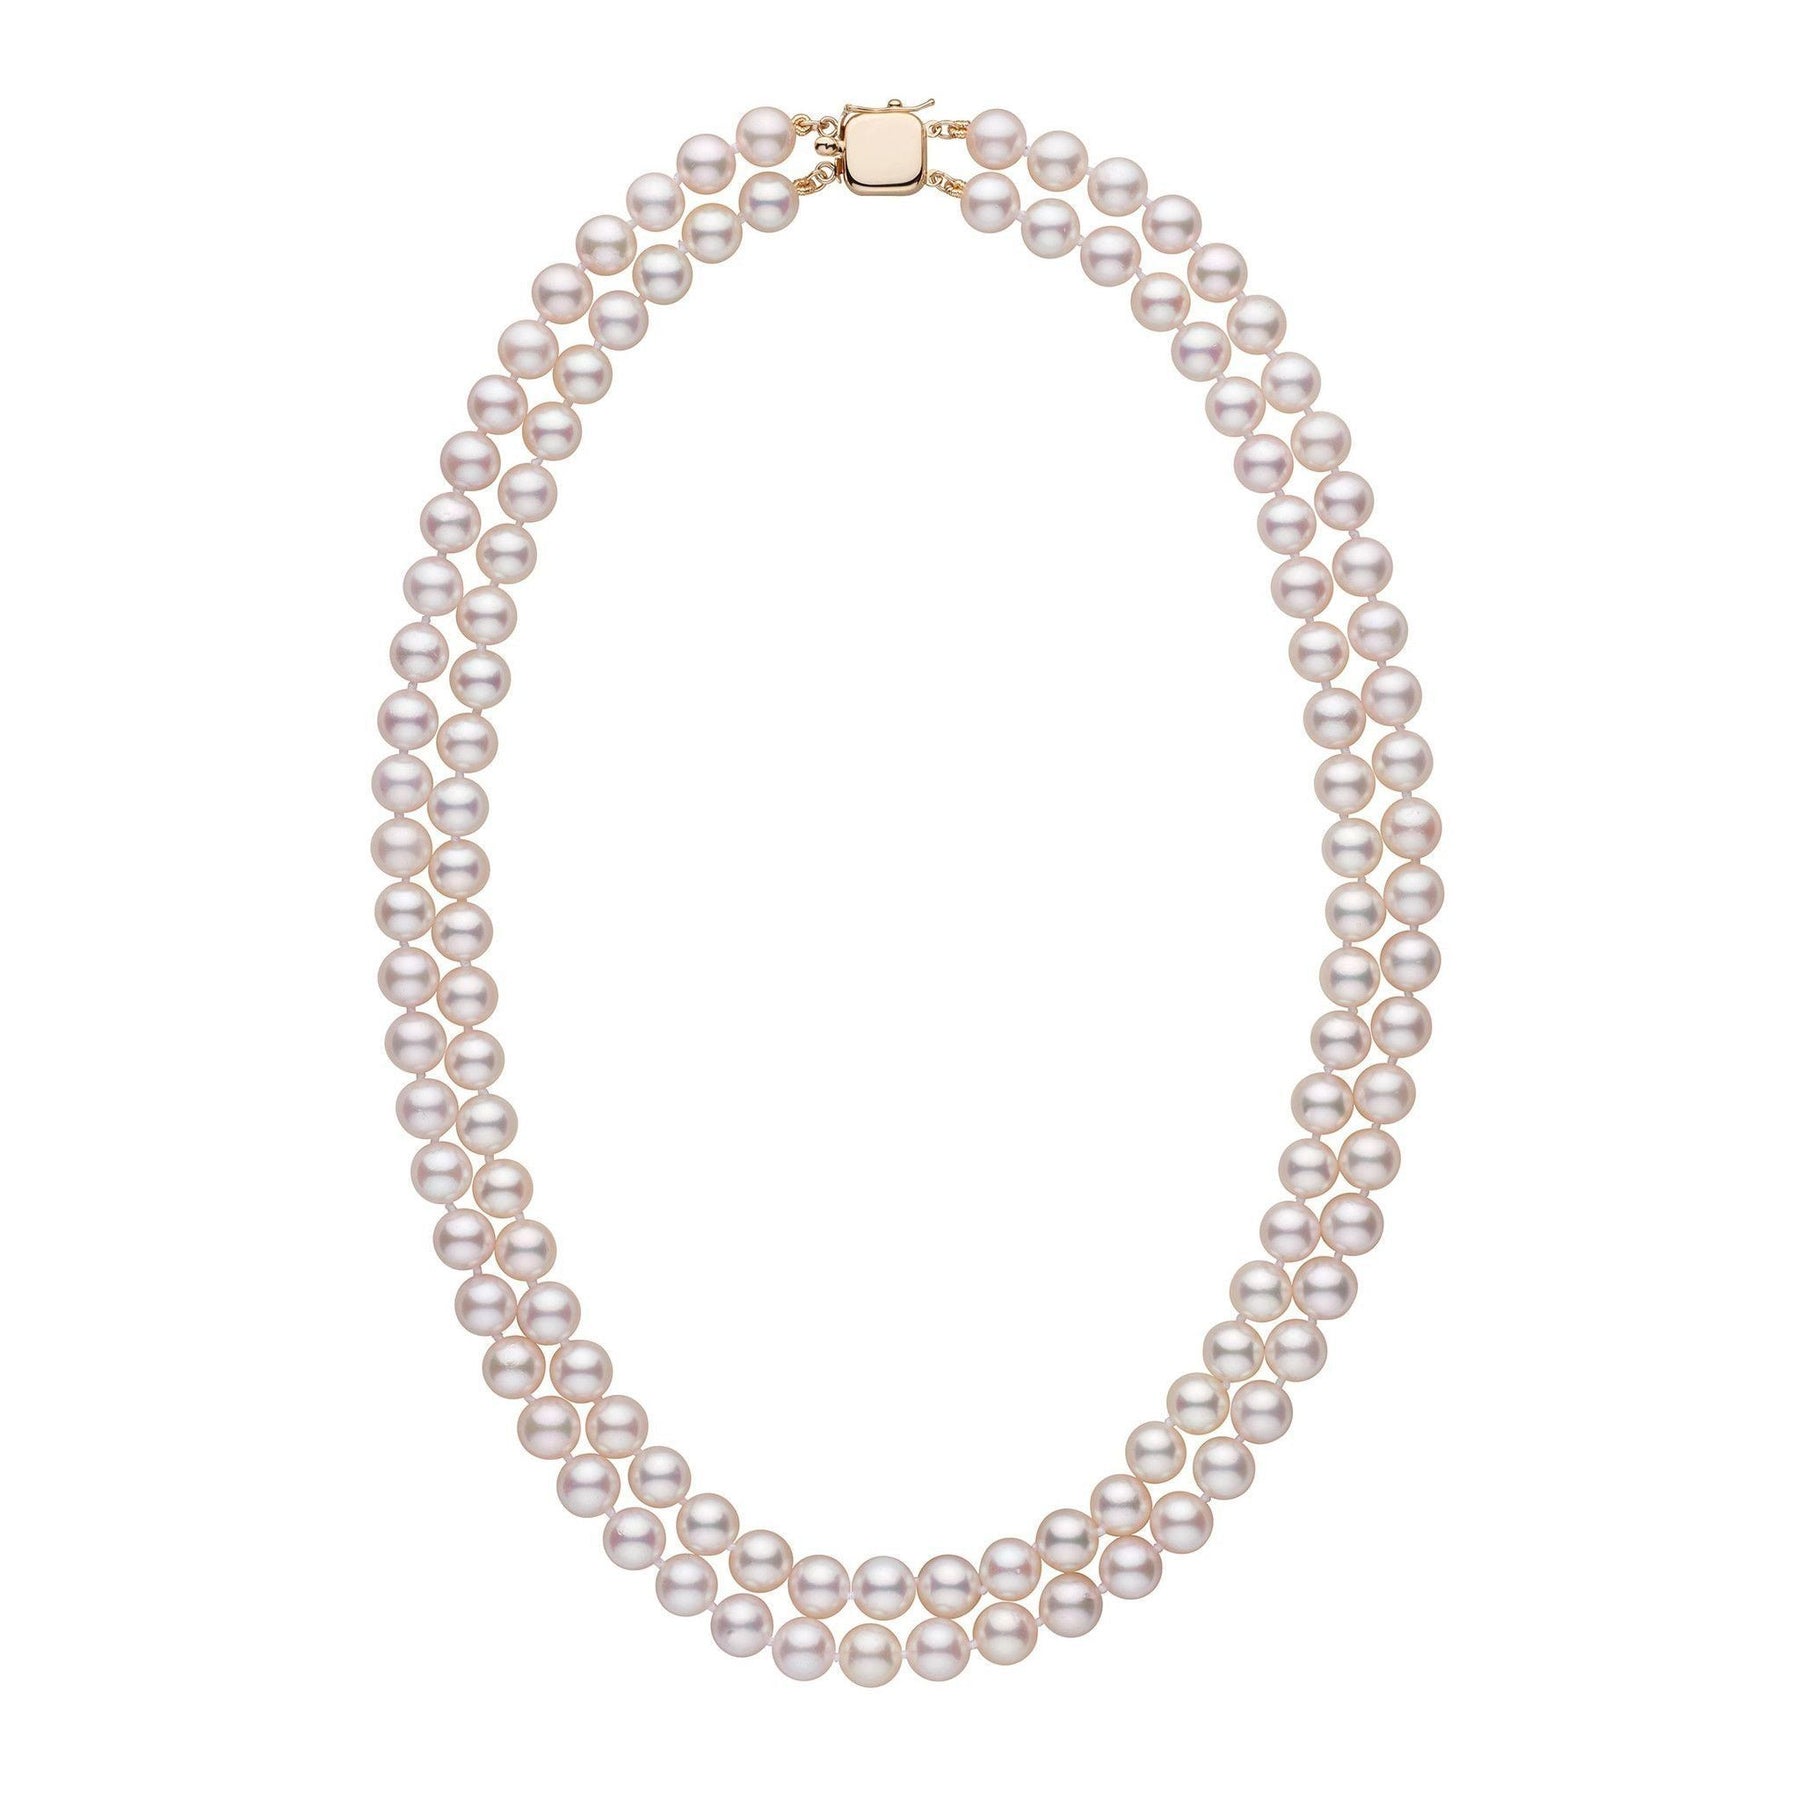 7.0-7.5 mm 18-inch AAA Double-Strand White Akoya Pearl Necklace – Pearl ...